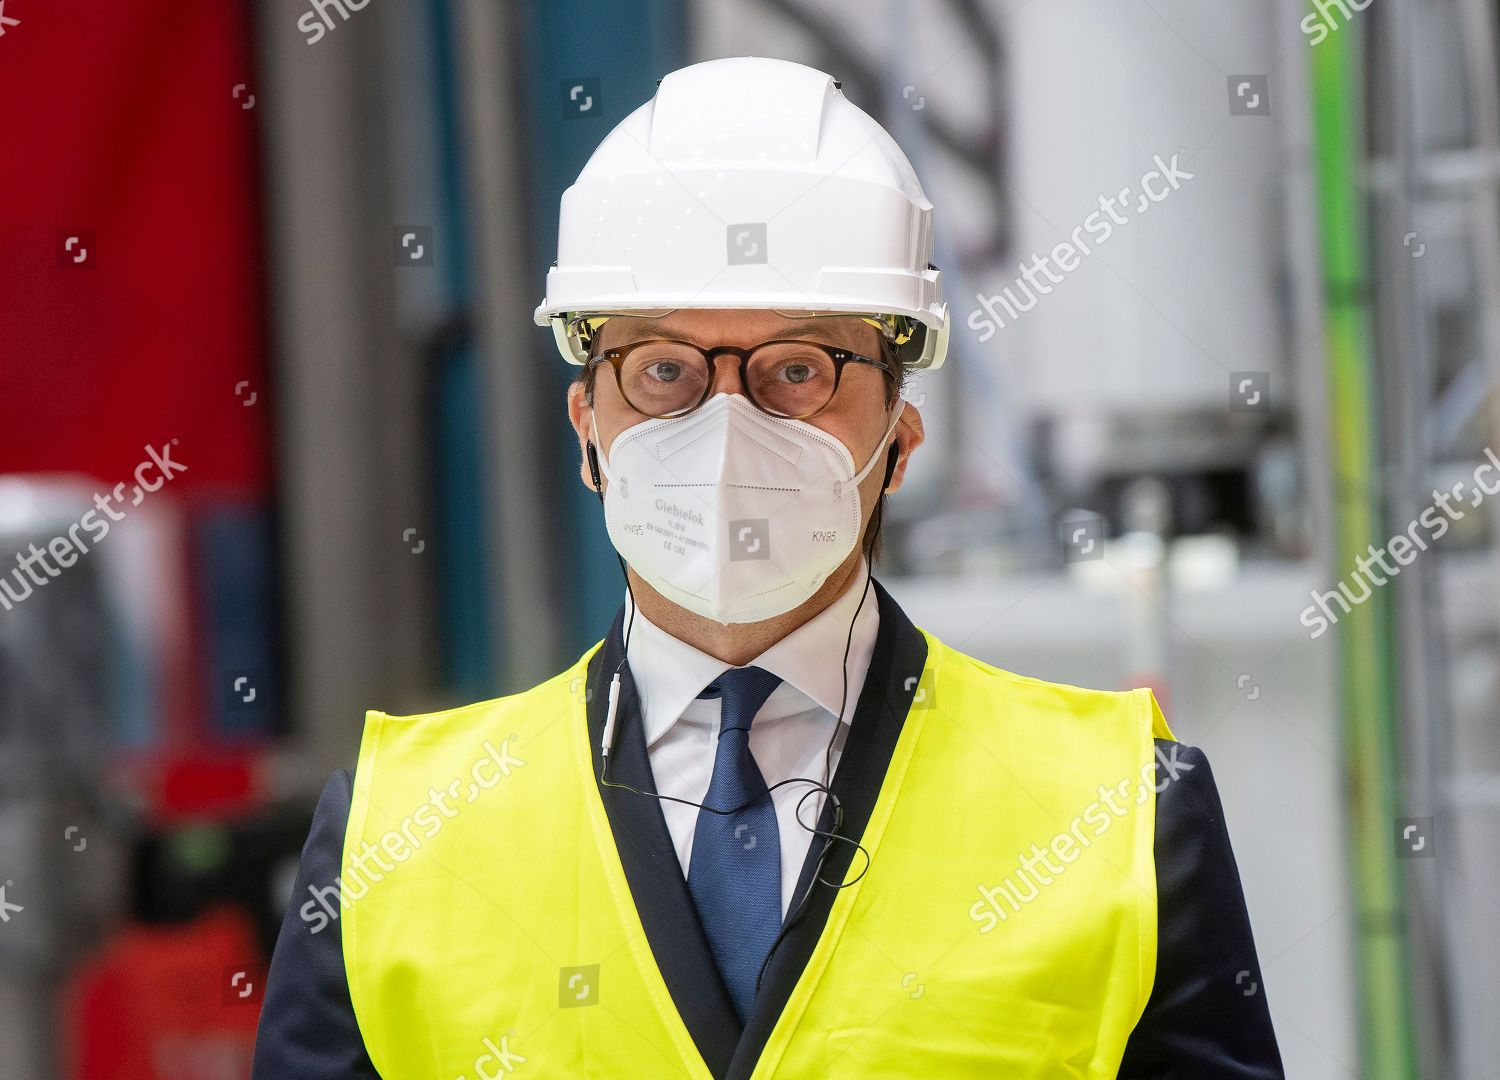 prince-daniel-visits-the-production-line-at-hitachi-abb-powergrids-ludvika-sweden-shutterstock-editorial-10784178h.jpg